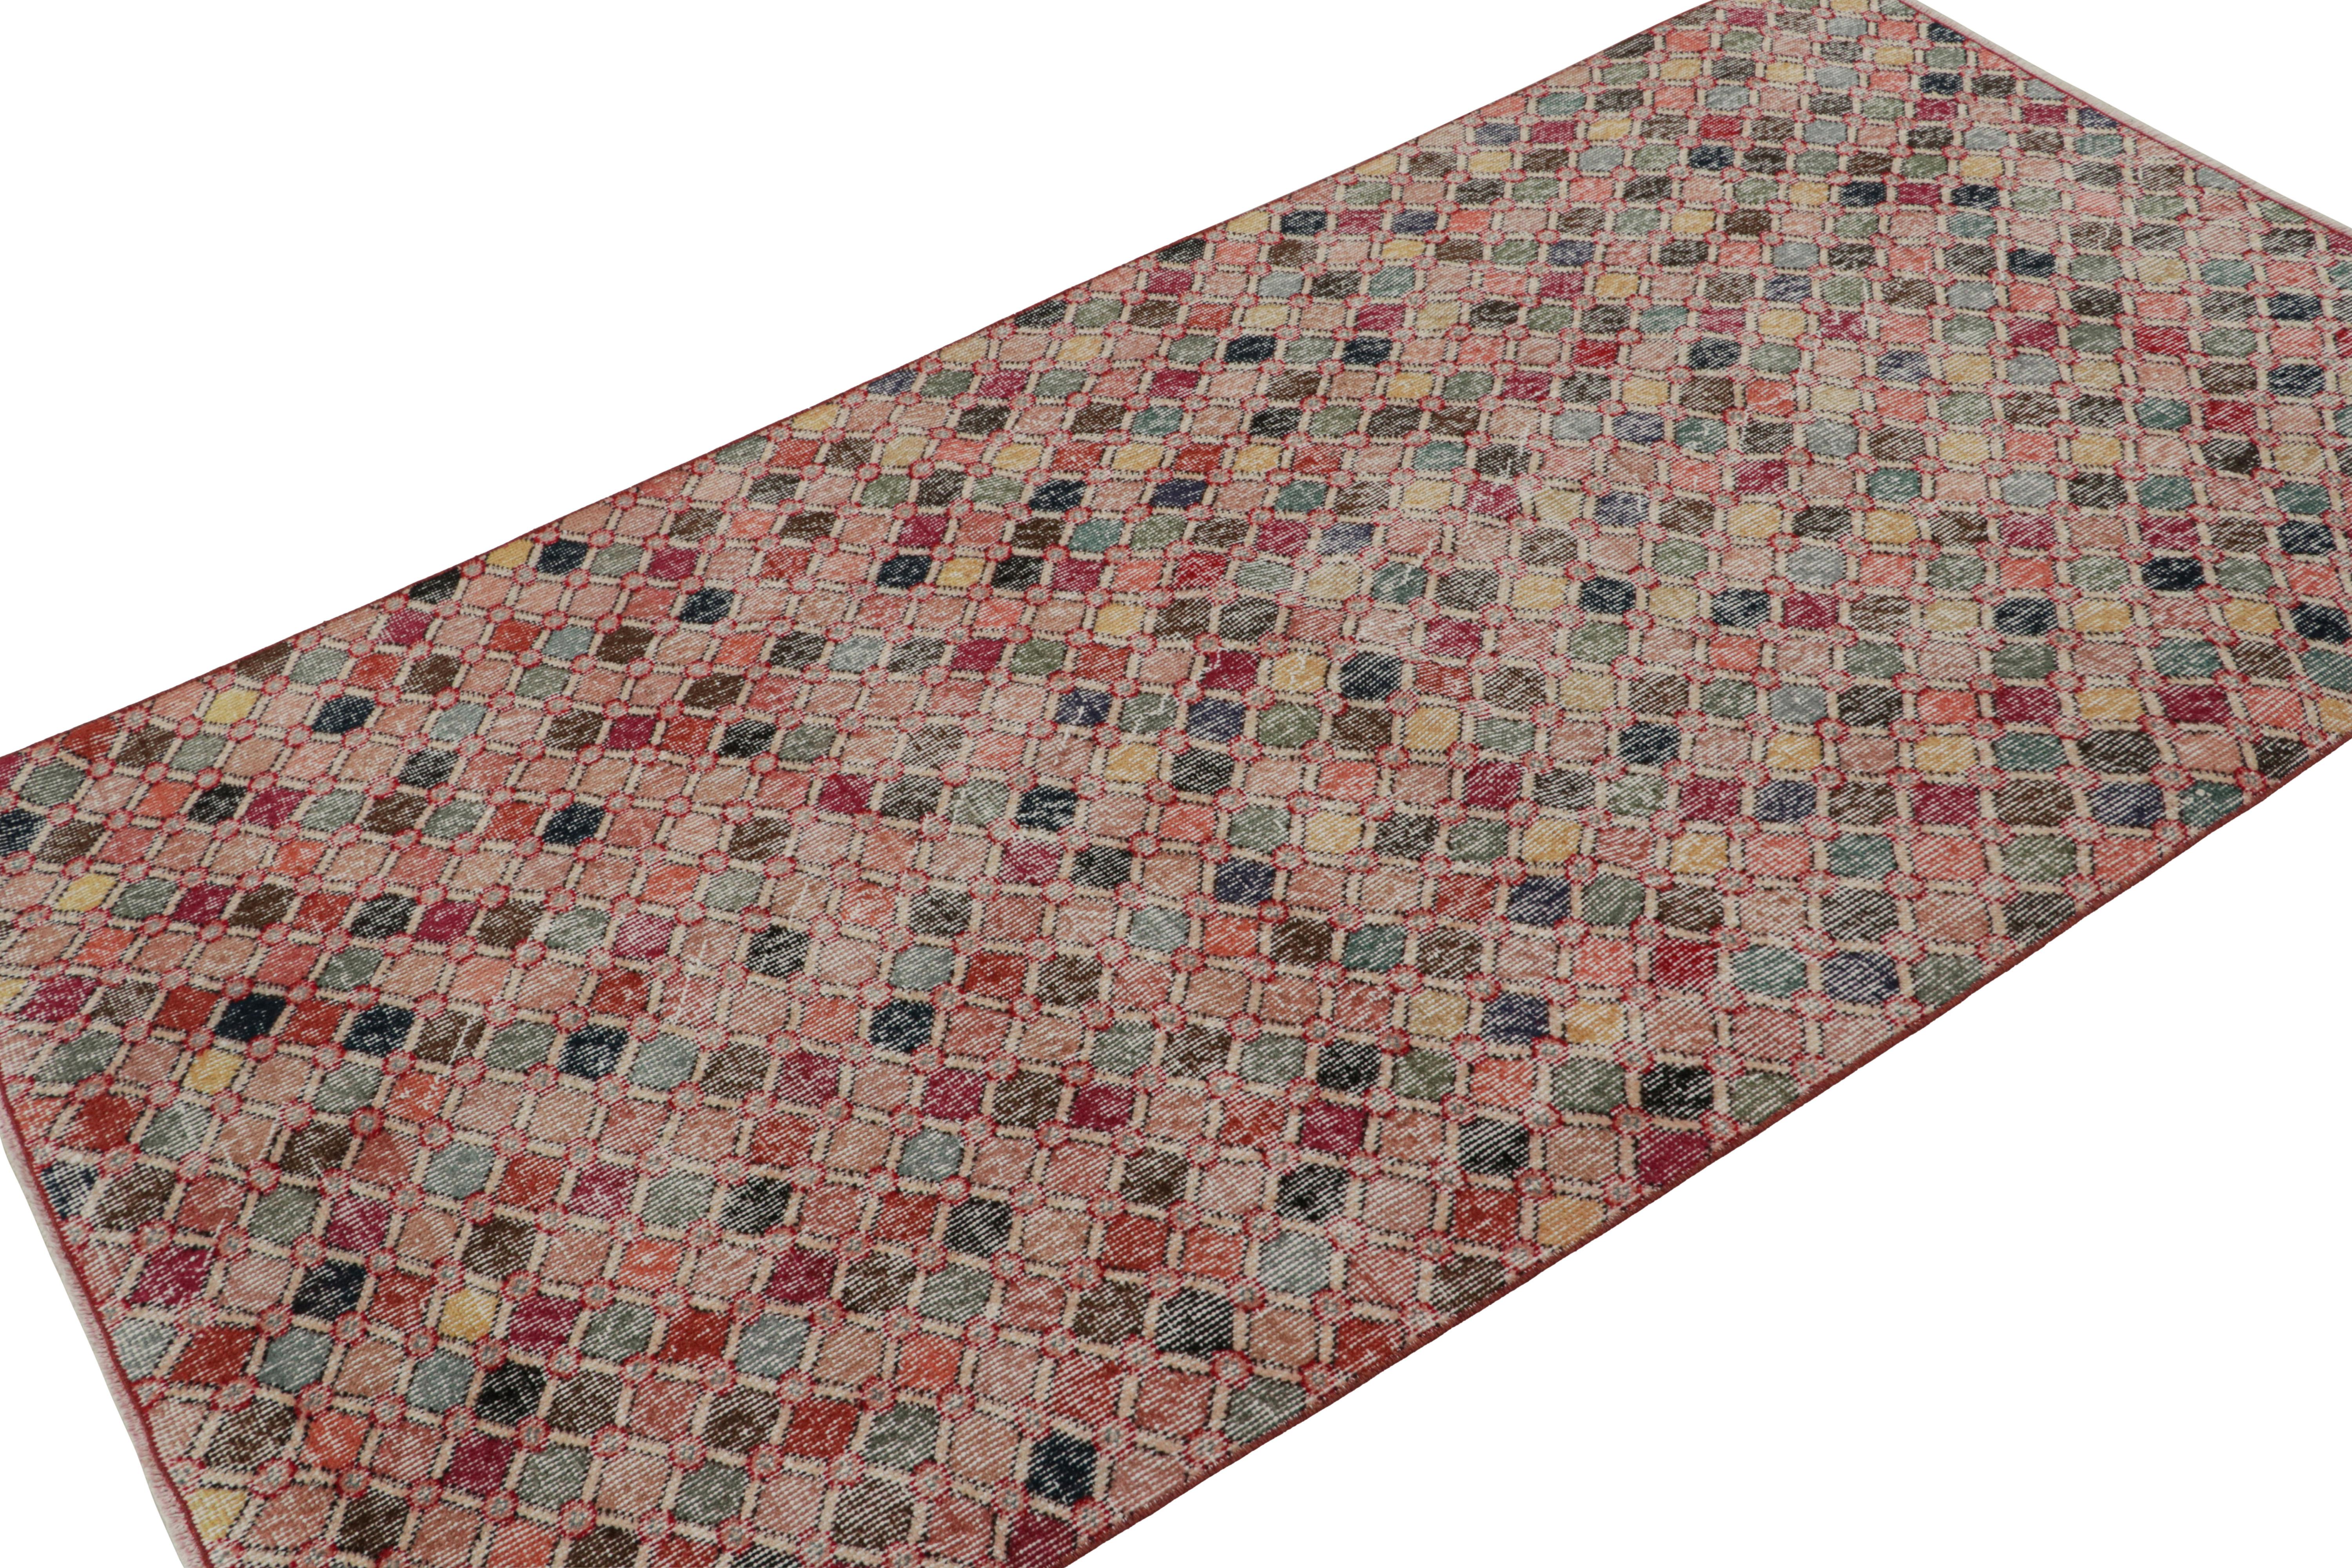 This vintage 4x7 Art Deco rug, hand-knotted in wool, circa 1960-1970, is a new addition to Rug & Kilim Collection. This line is a commemoration, with rare curations we believe to hail from multidisciplinary Turkish designer Zeki Müren. 

On the